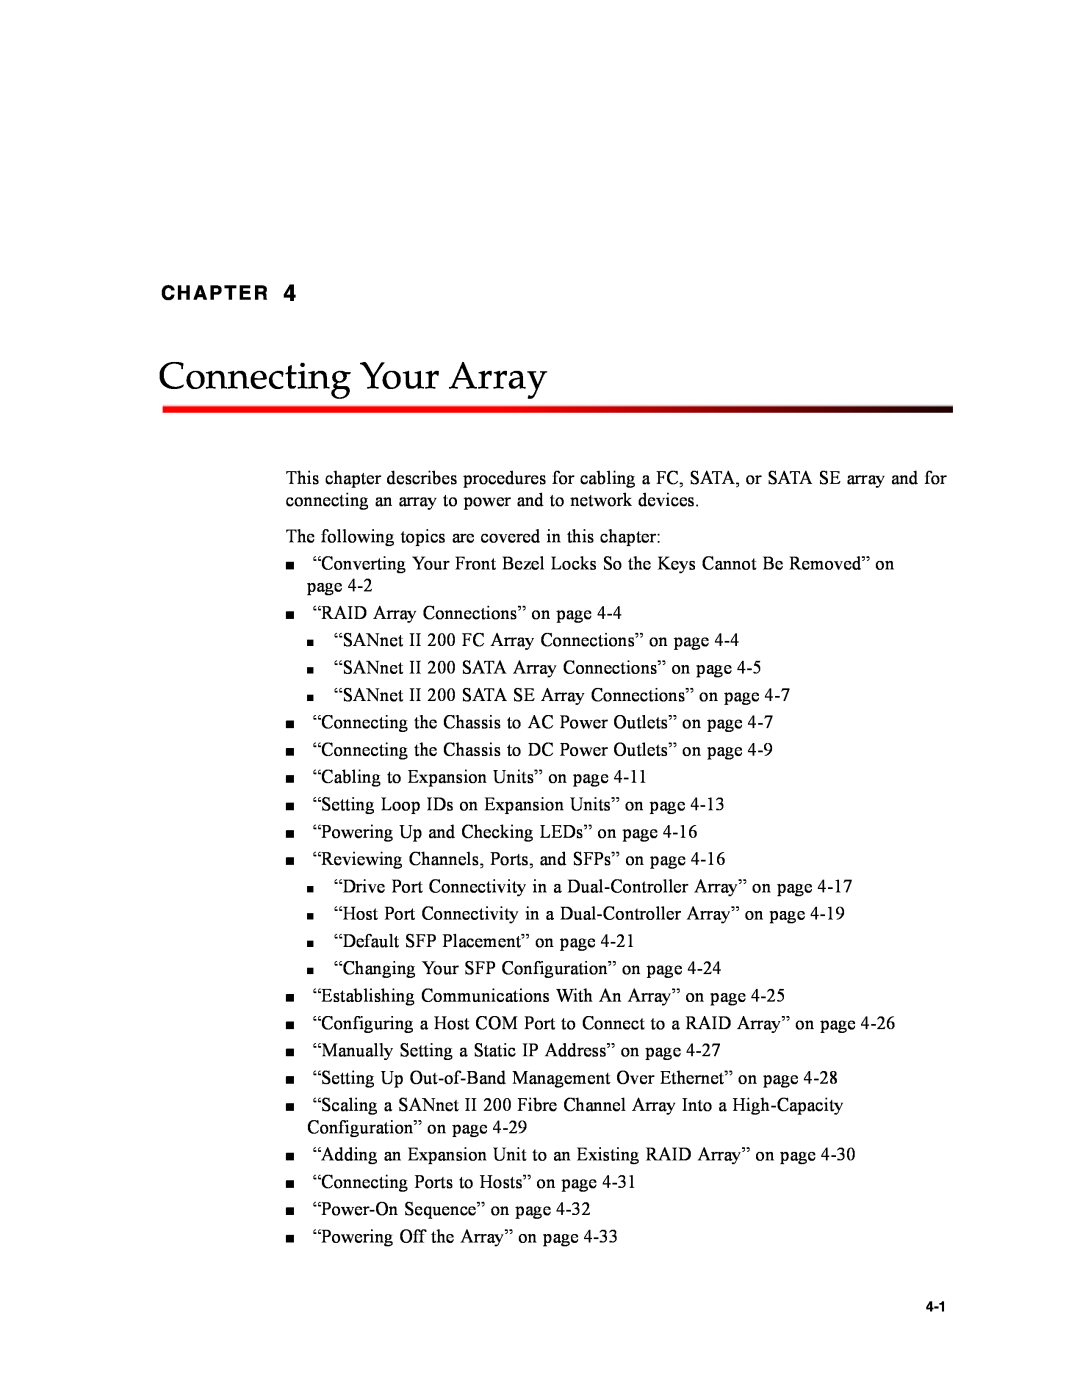 Dot Hill Systems II 200 FC service manual Connecting Your Array, Chapter 